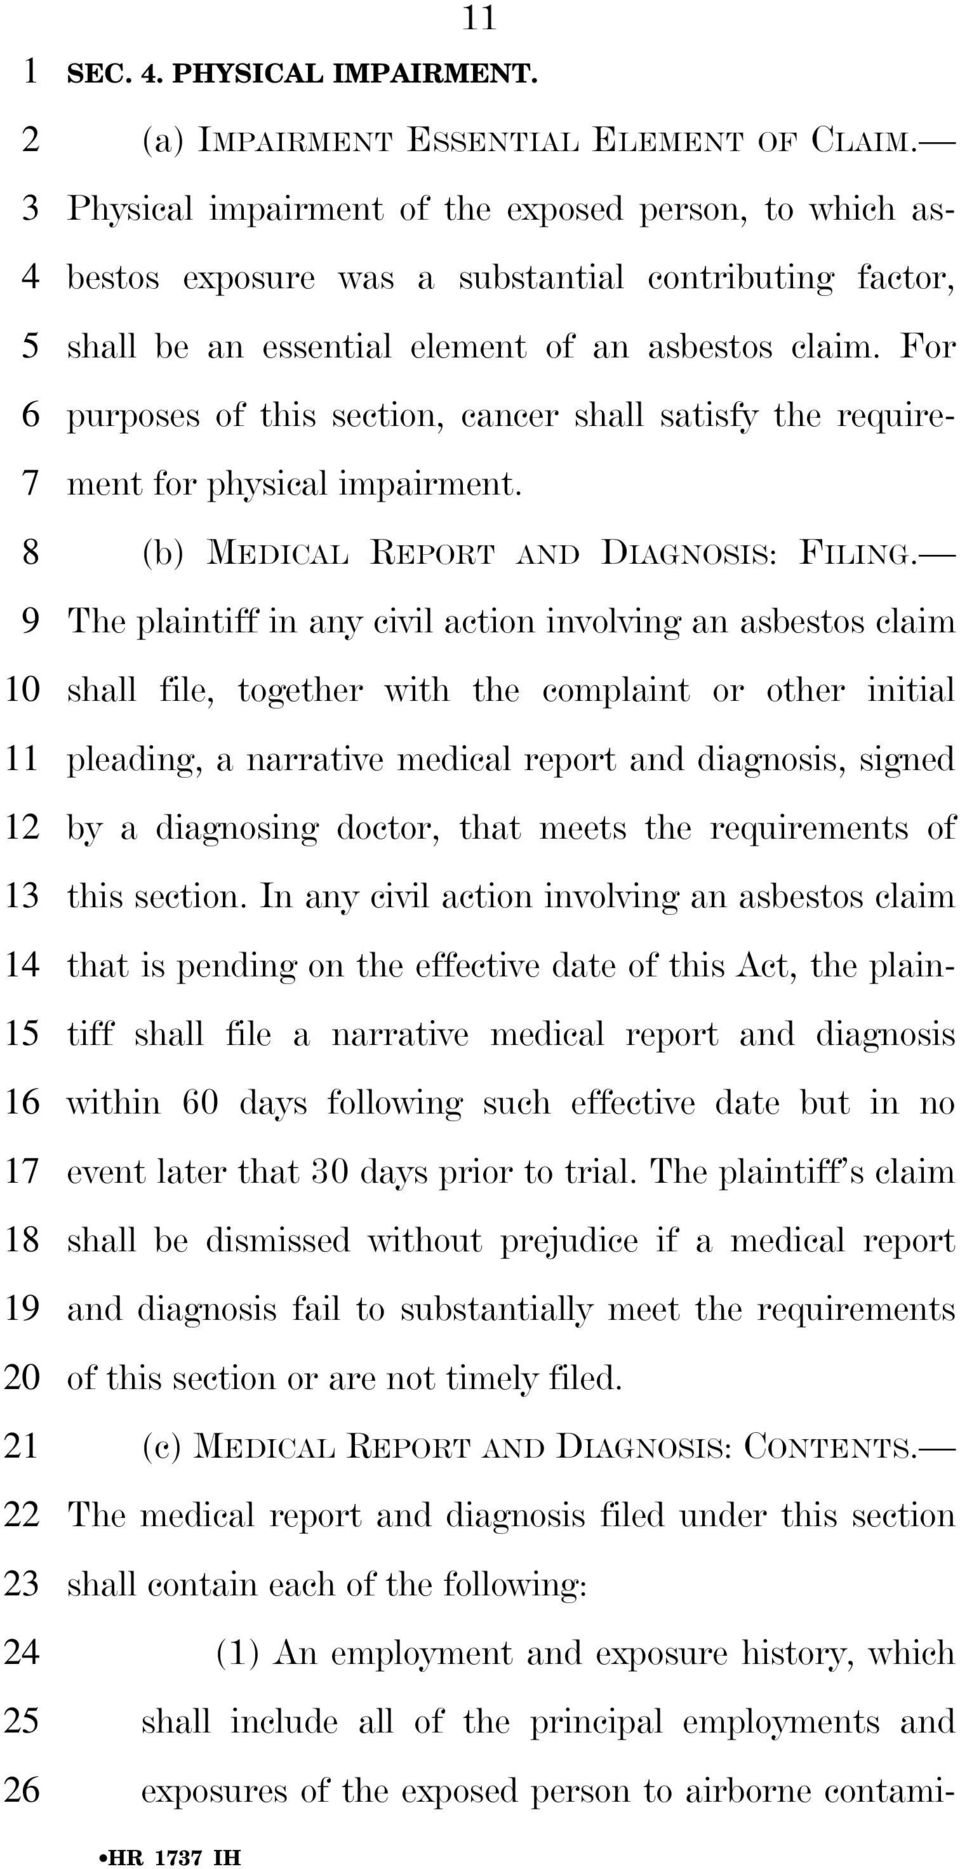 For purposes of this section, cancer shall satisfy the requirement for physical impairment. (b) MEDICAL REPORT AND DIAGNOSIS: FILING.